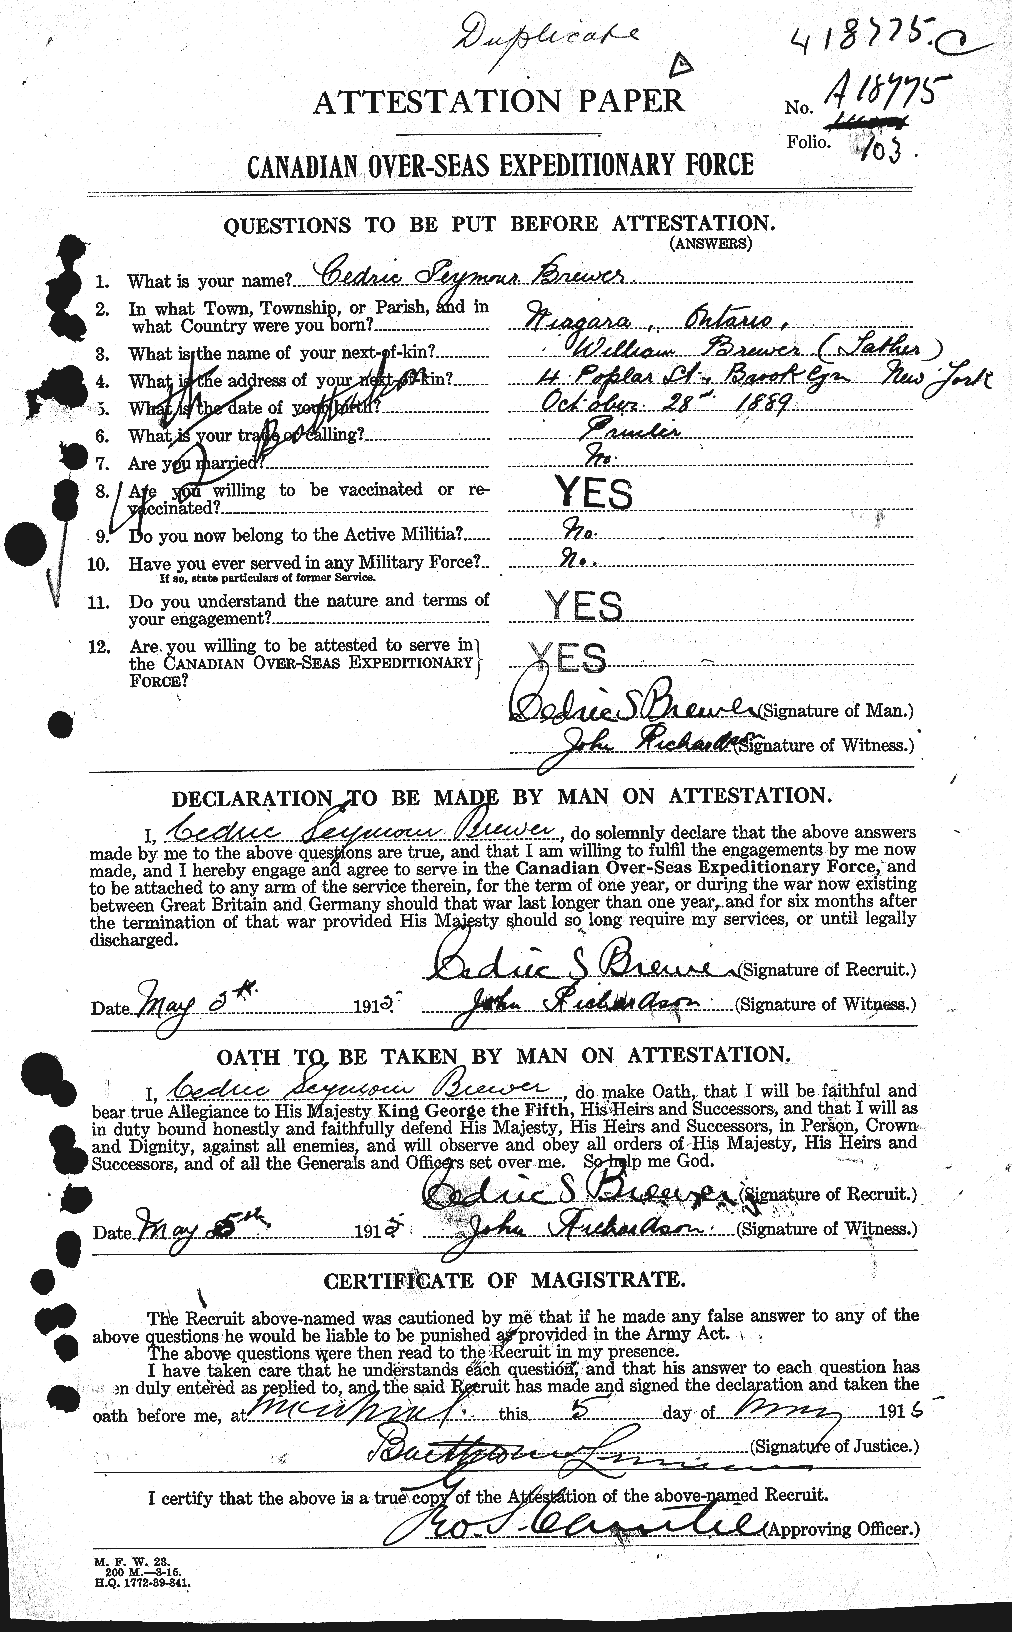 Personnel Records of the First World War - CEF 258931a